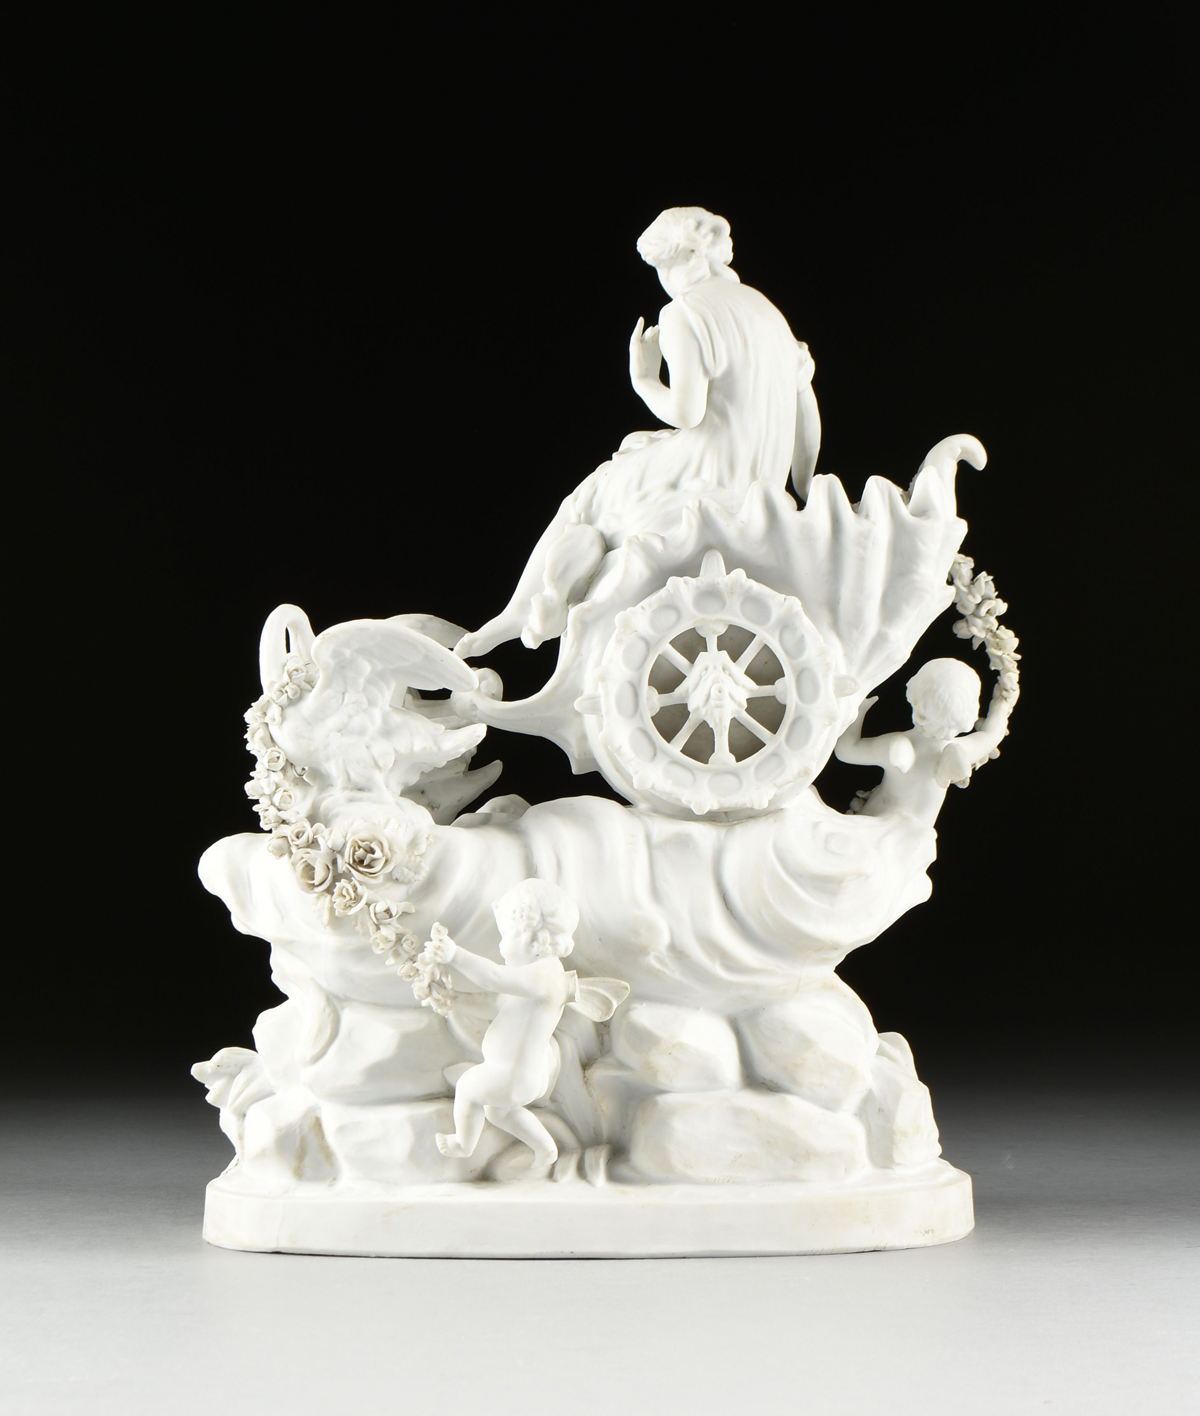 A BAROQUE REVIVAL BISQUE PORCELAIN FIGURAL GROUPING, "Allegory of Spring," POSSIBLY GERMAN, LATE - Image 6 of 11